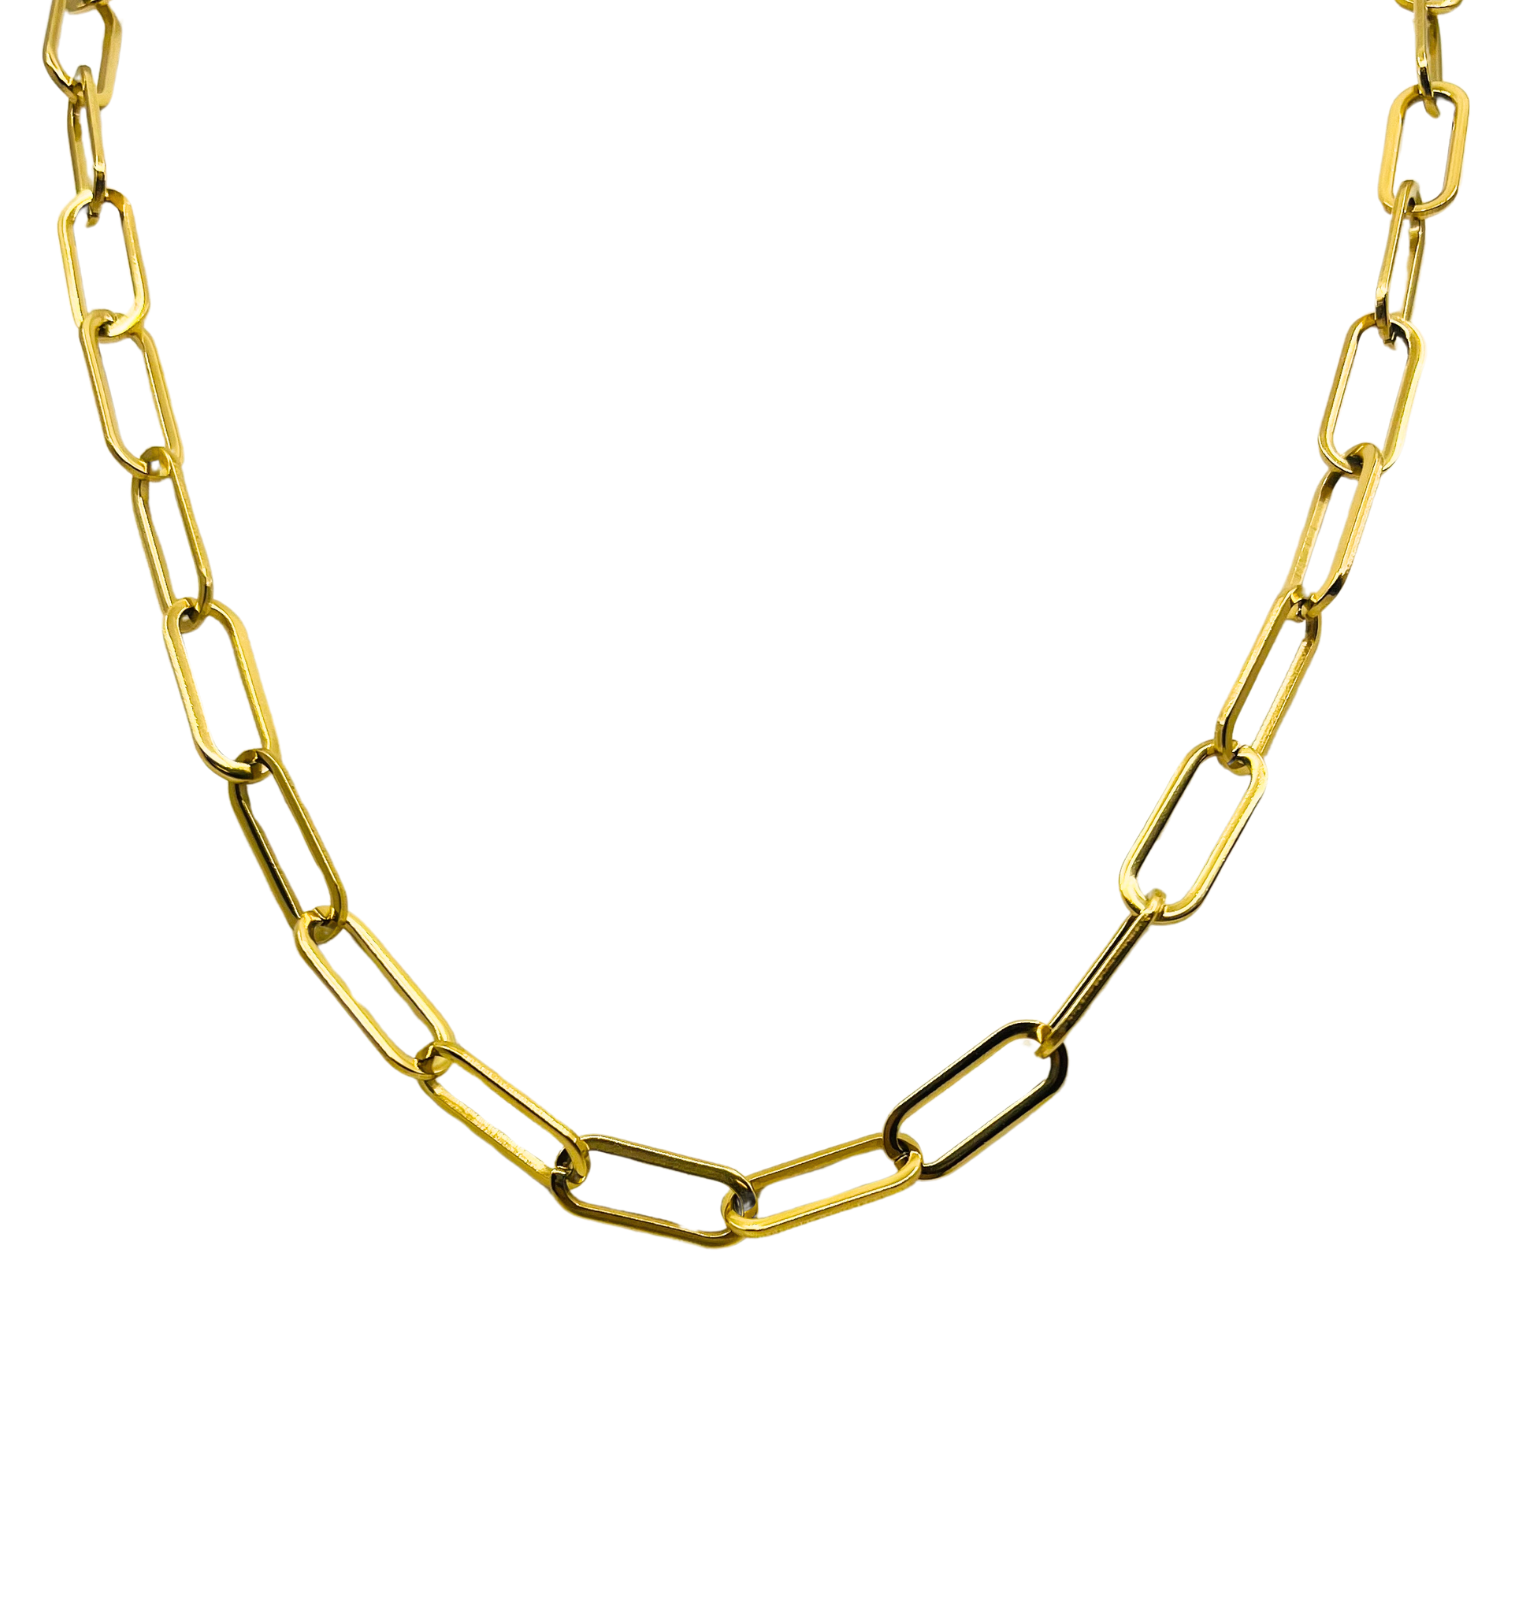 The Large Gold Paperclip Chain